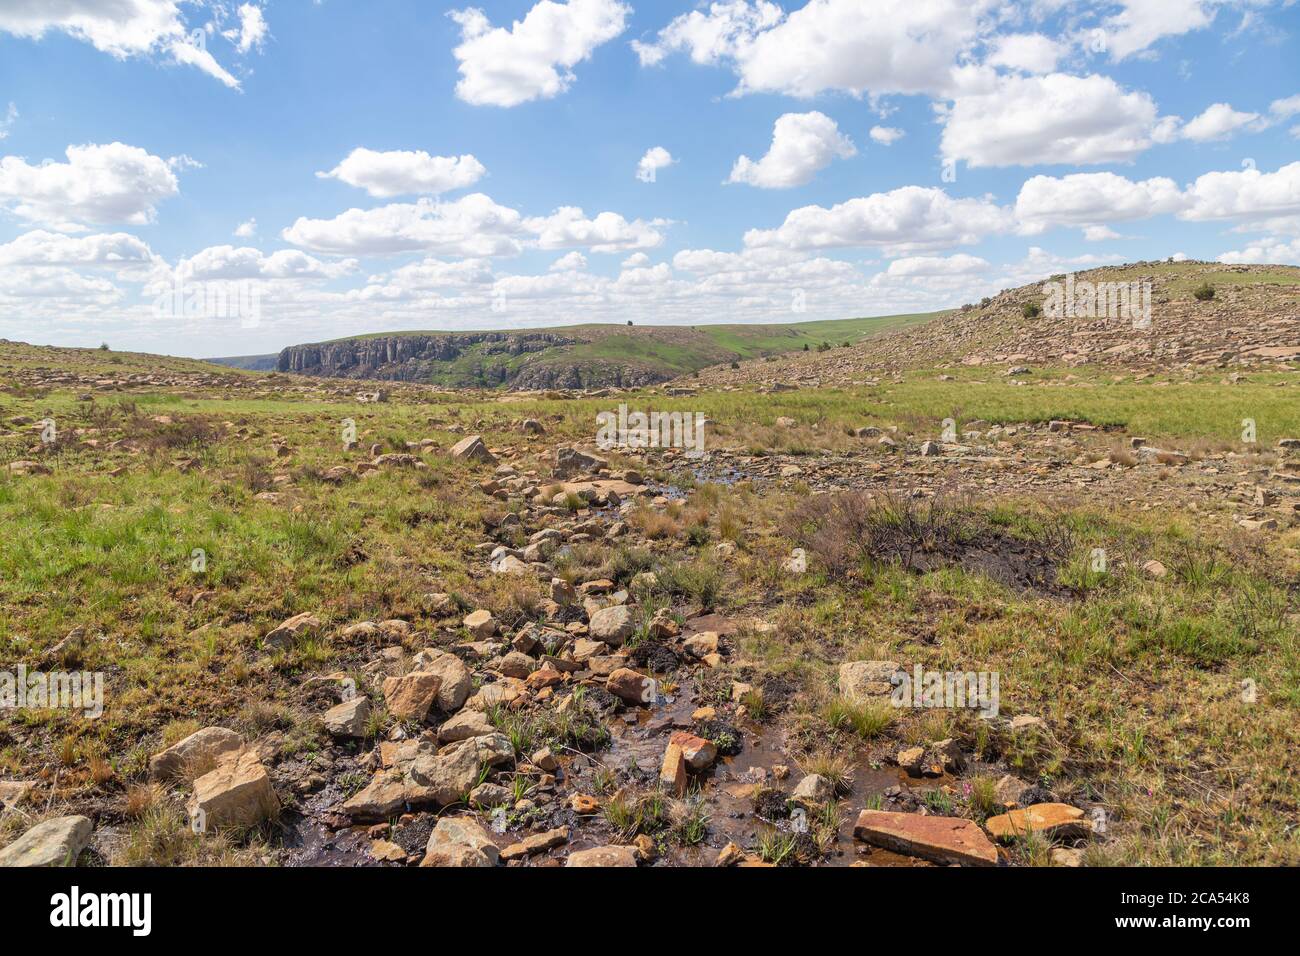 Landscape on the eastern side of Platberg, close to Harrismith, Freestate, South Africa Stock Photo